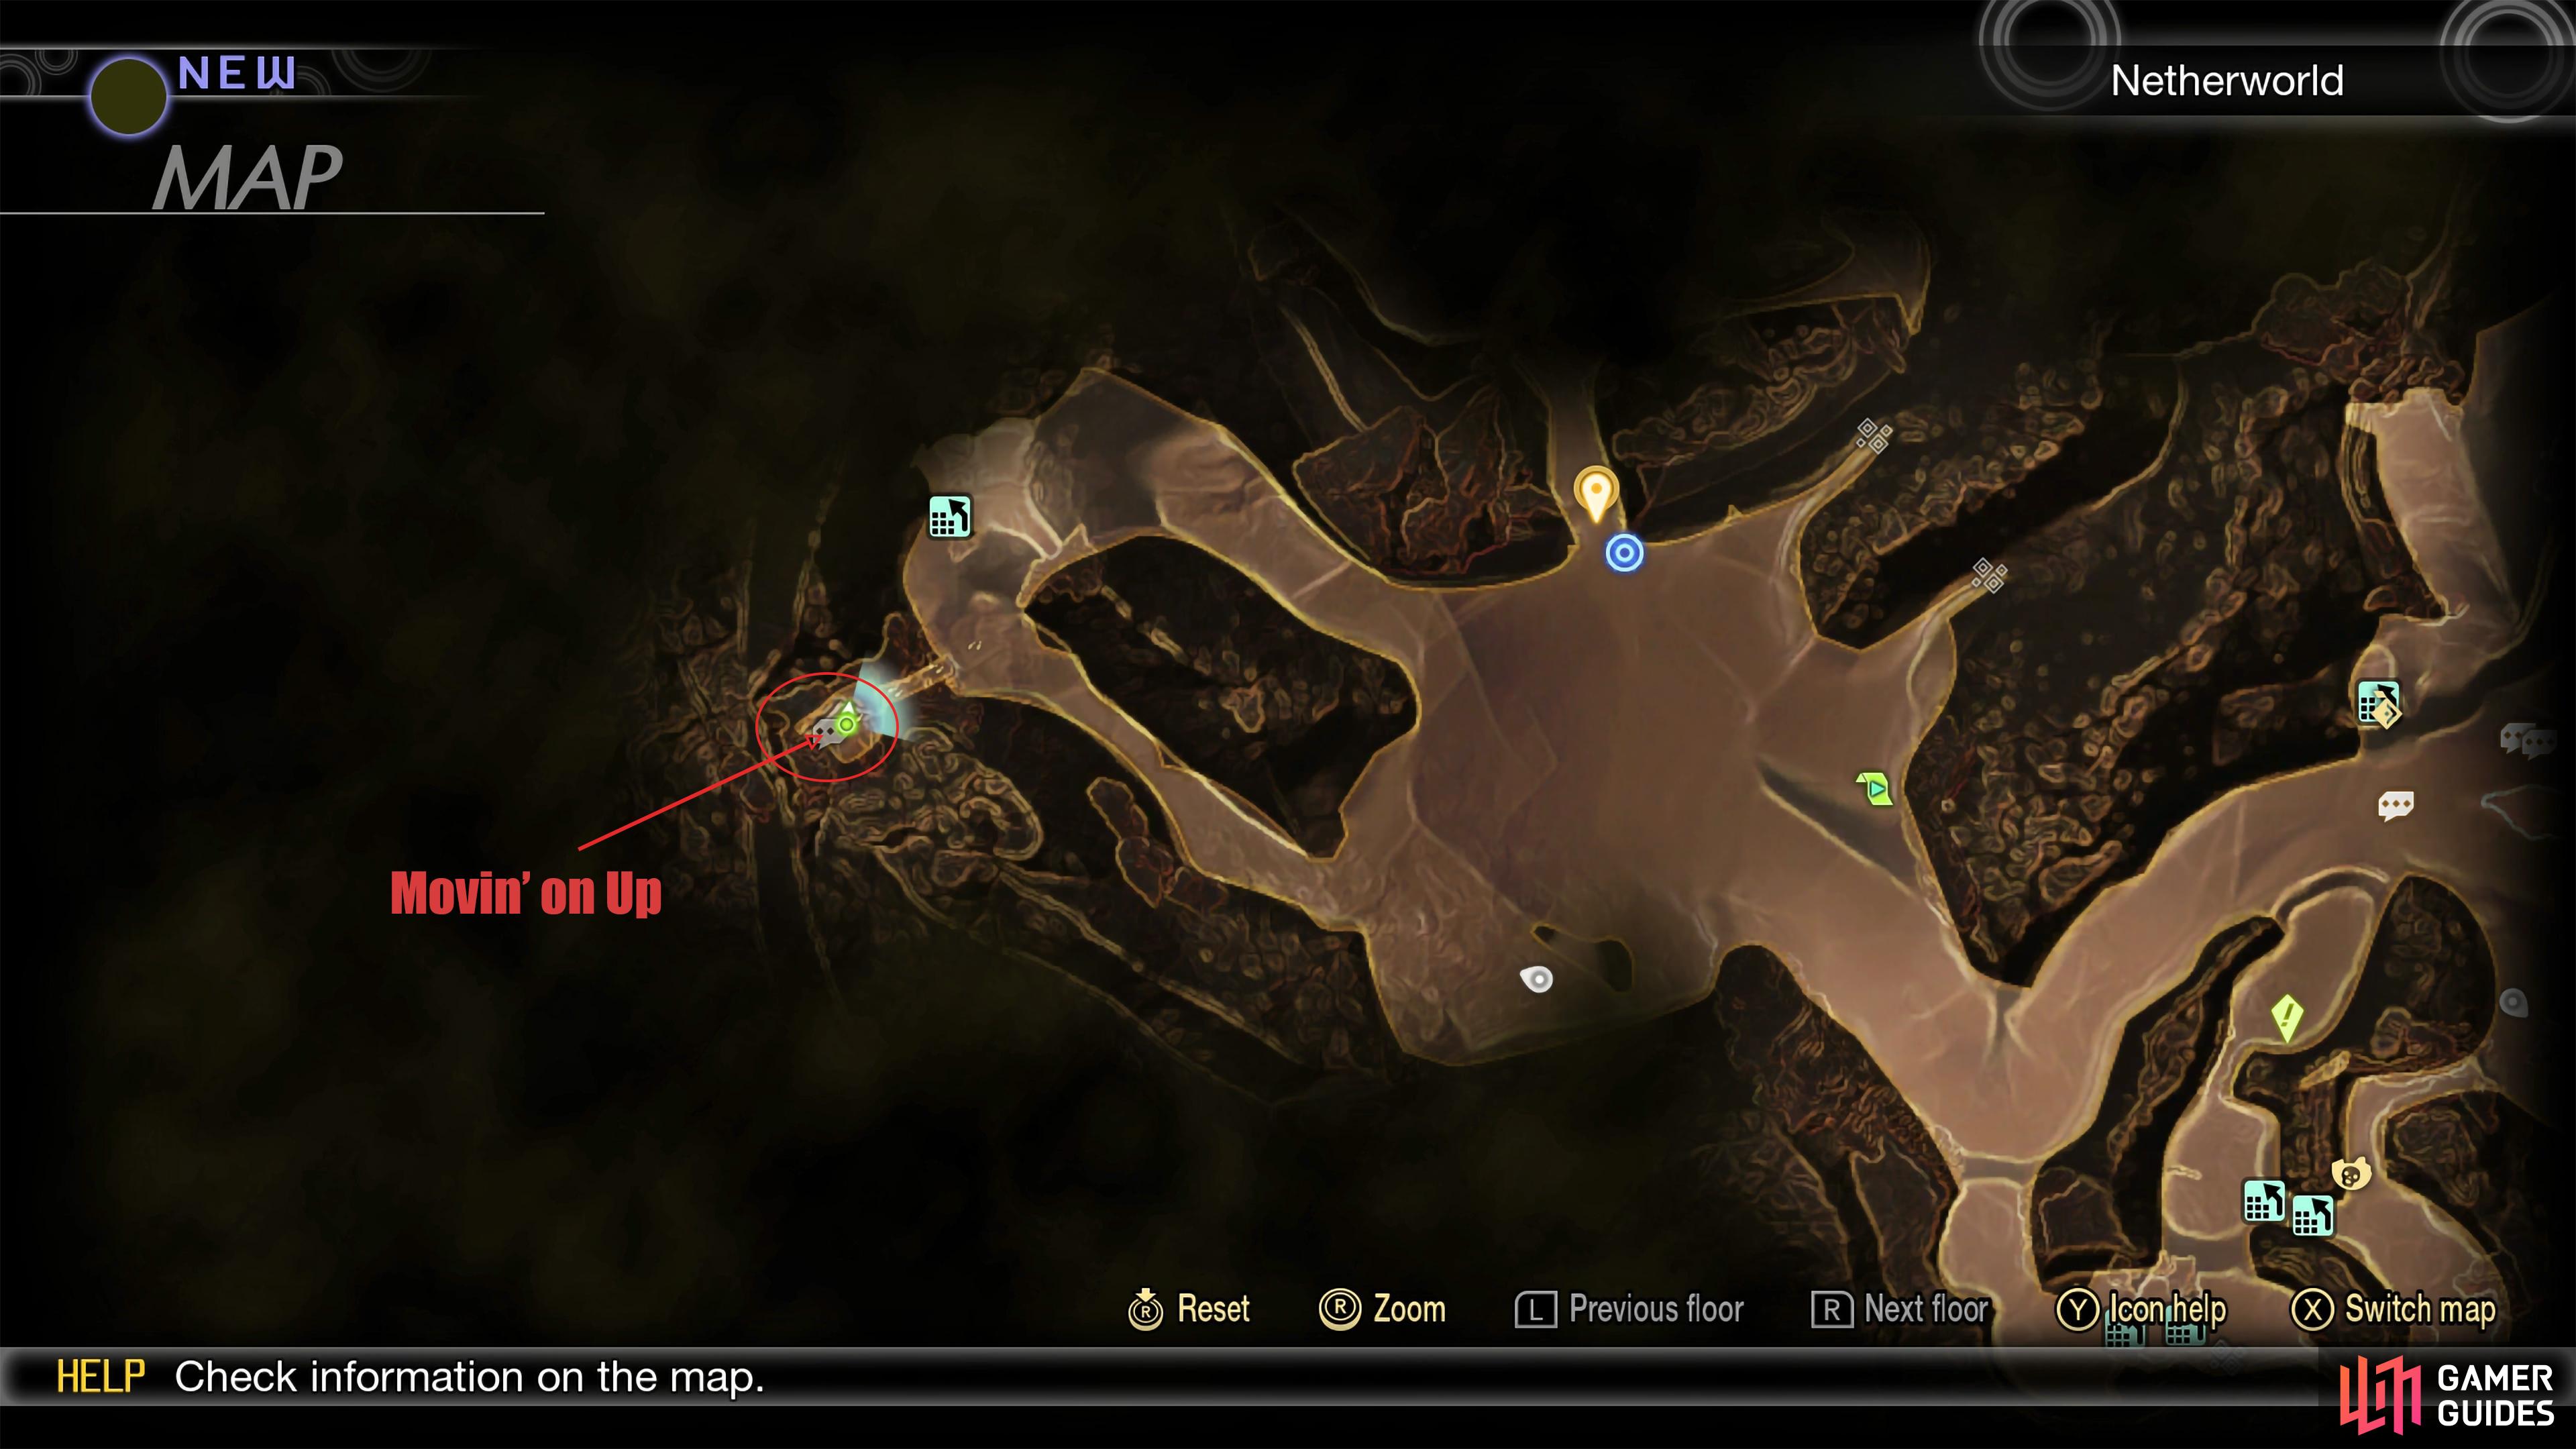 You need to take the lower southwestern path to find the cave where the quest is.